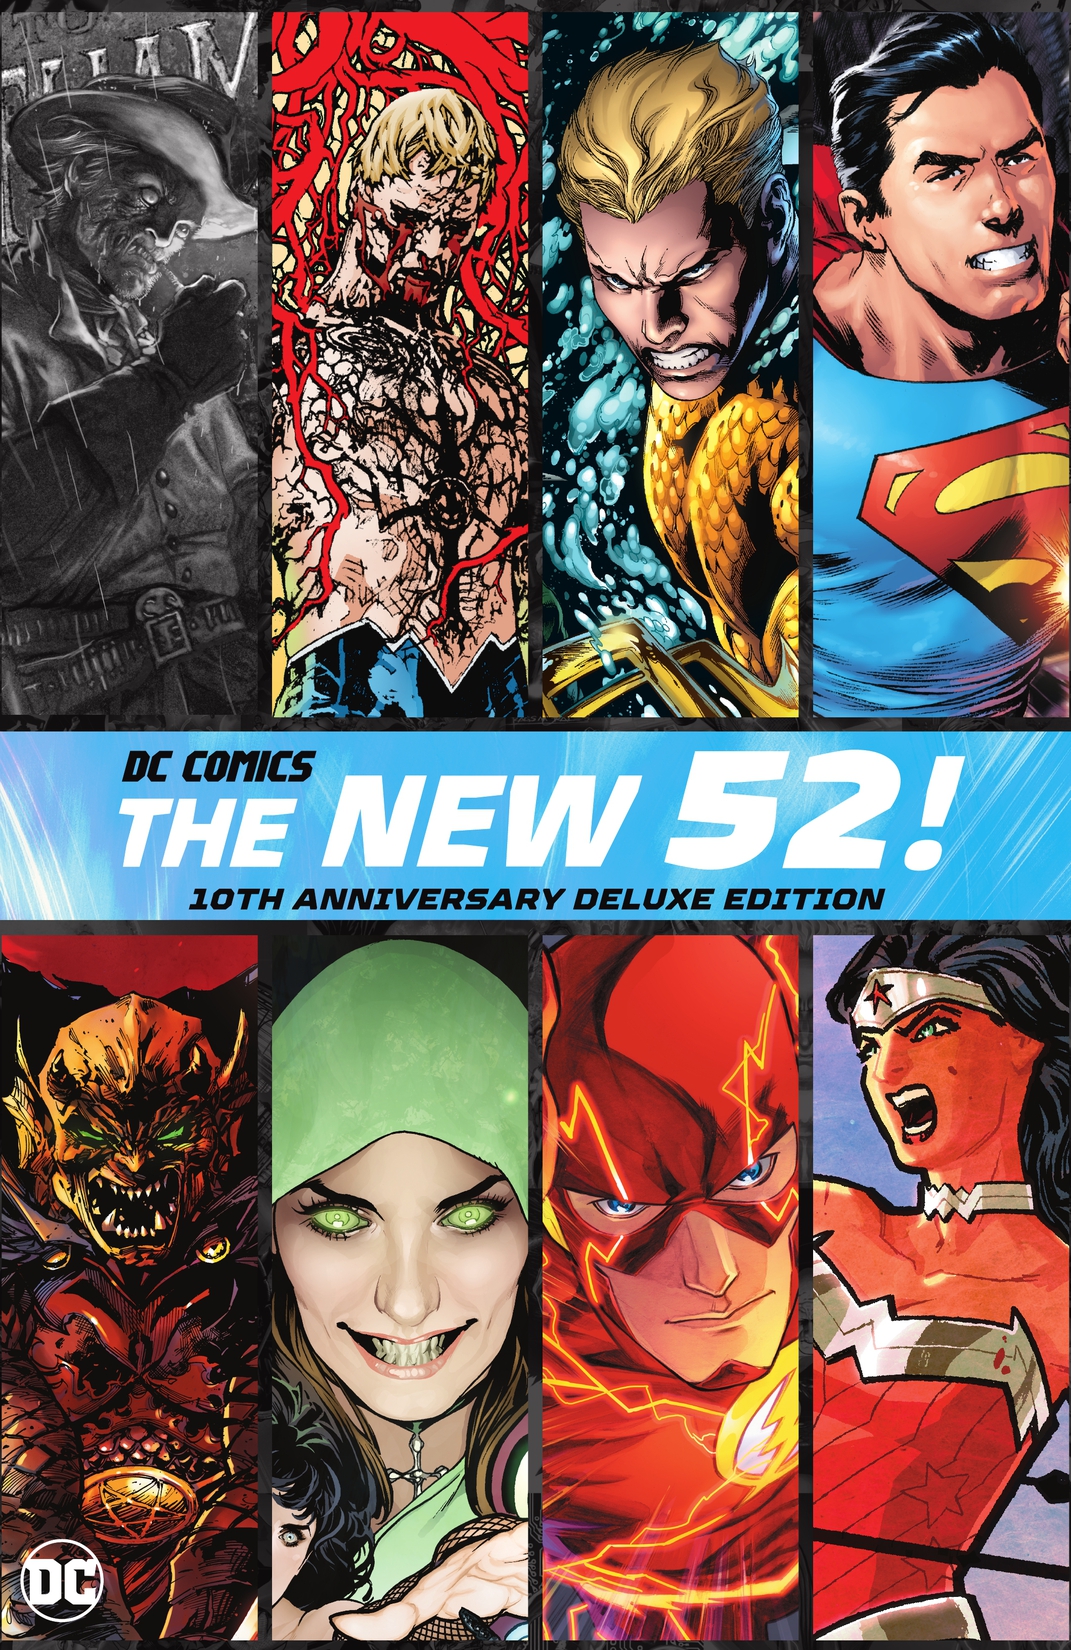 DC Comics: The New 52 10th Anniversary Deluxe Edition preview images